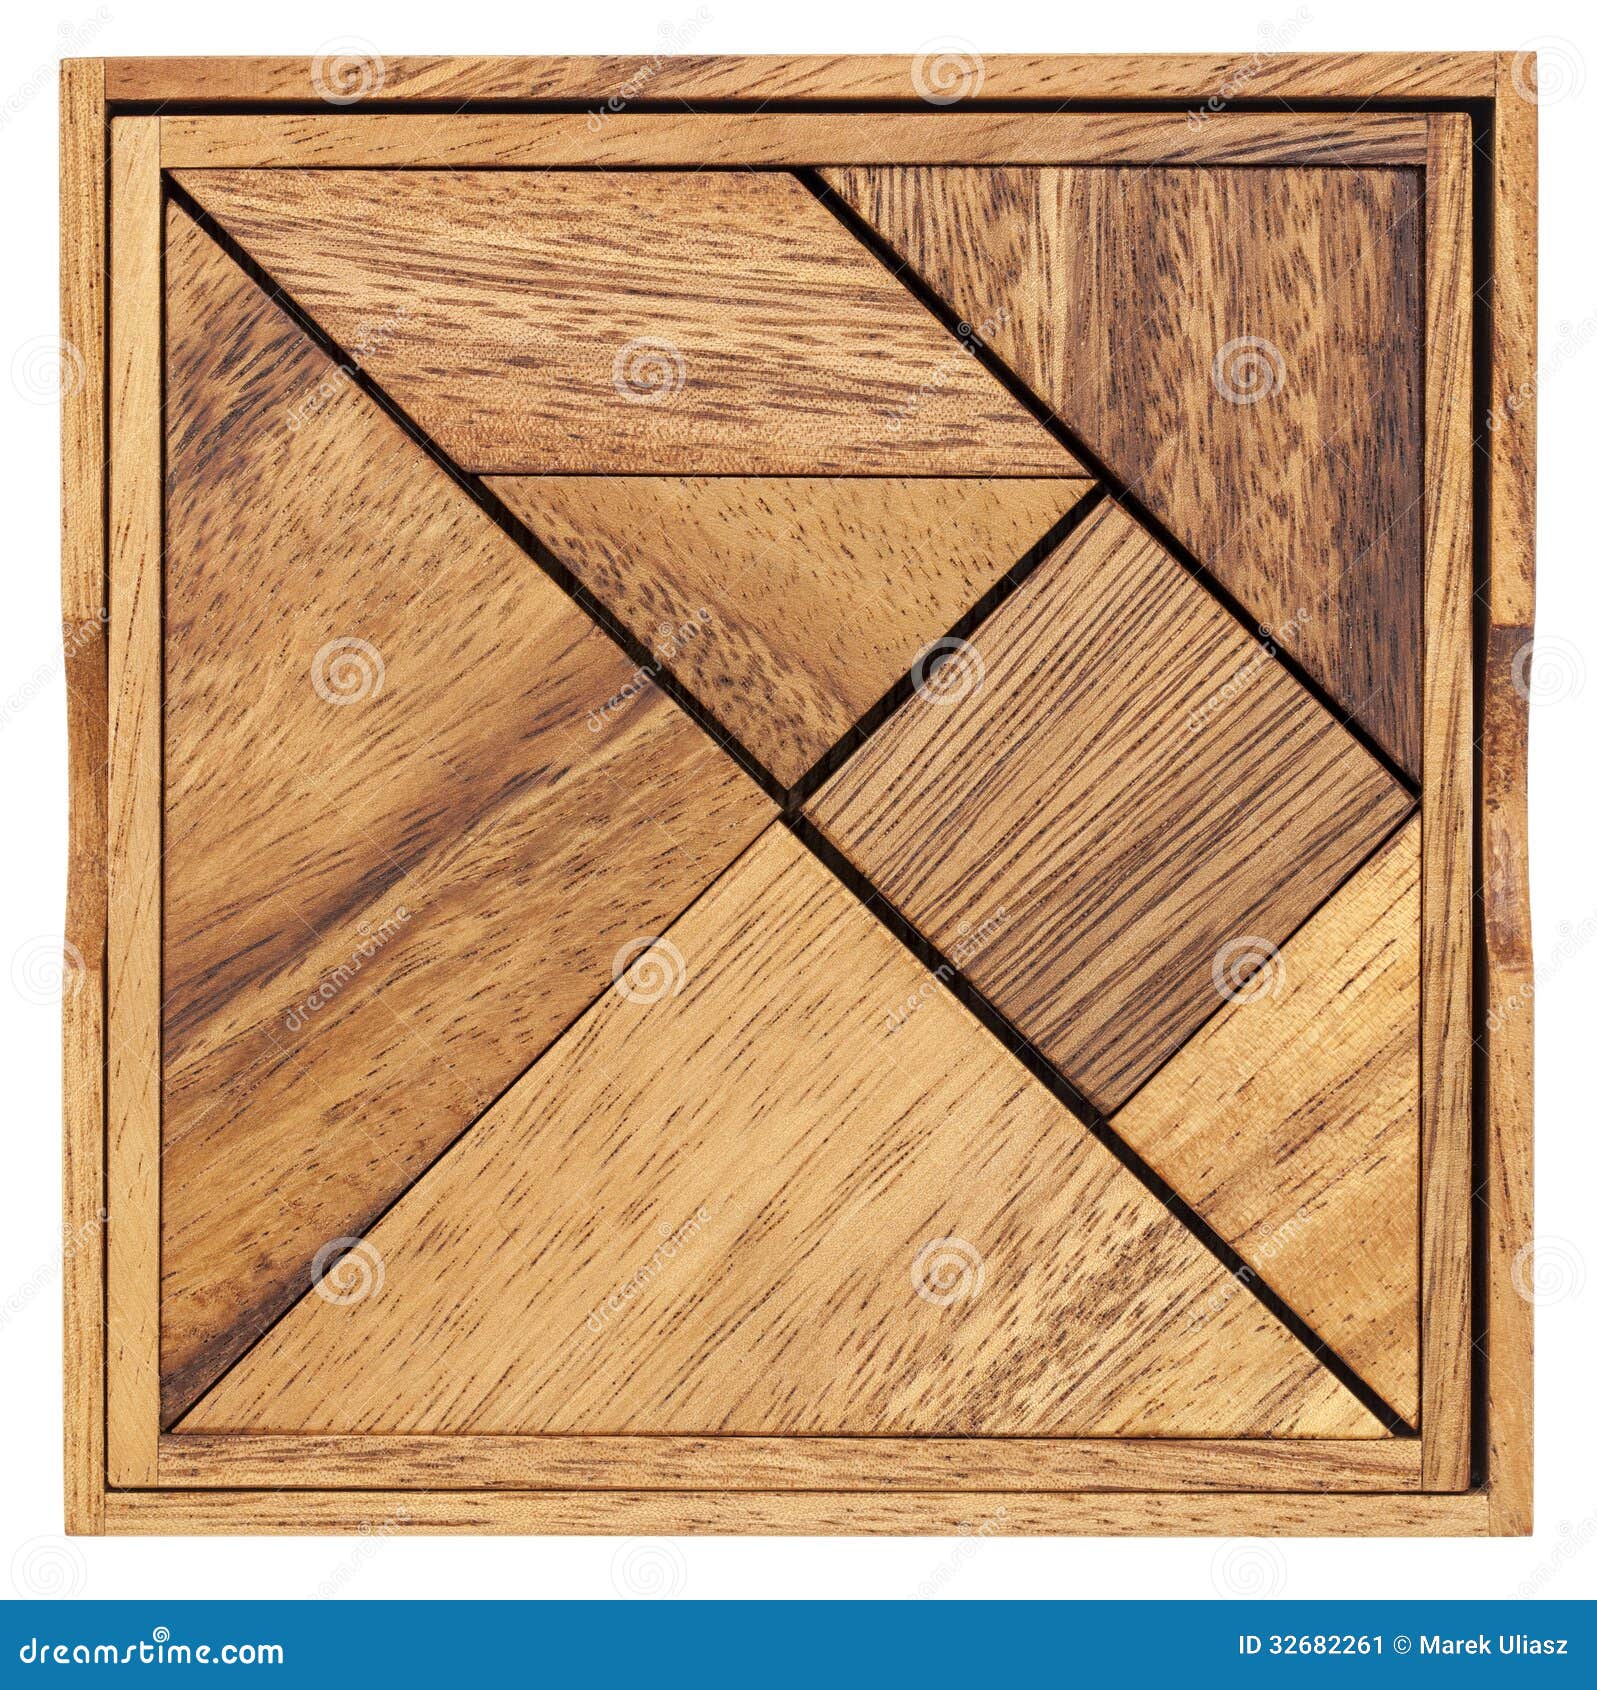 Tangram - Chinese Puzzle Game Stock Image - Image of 